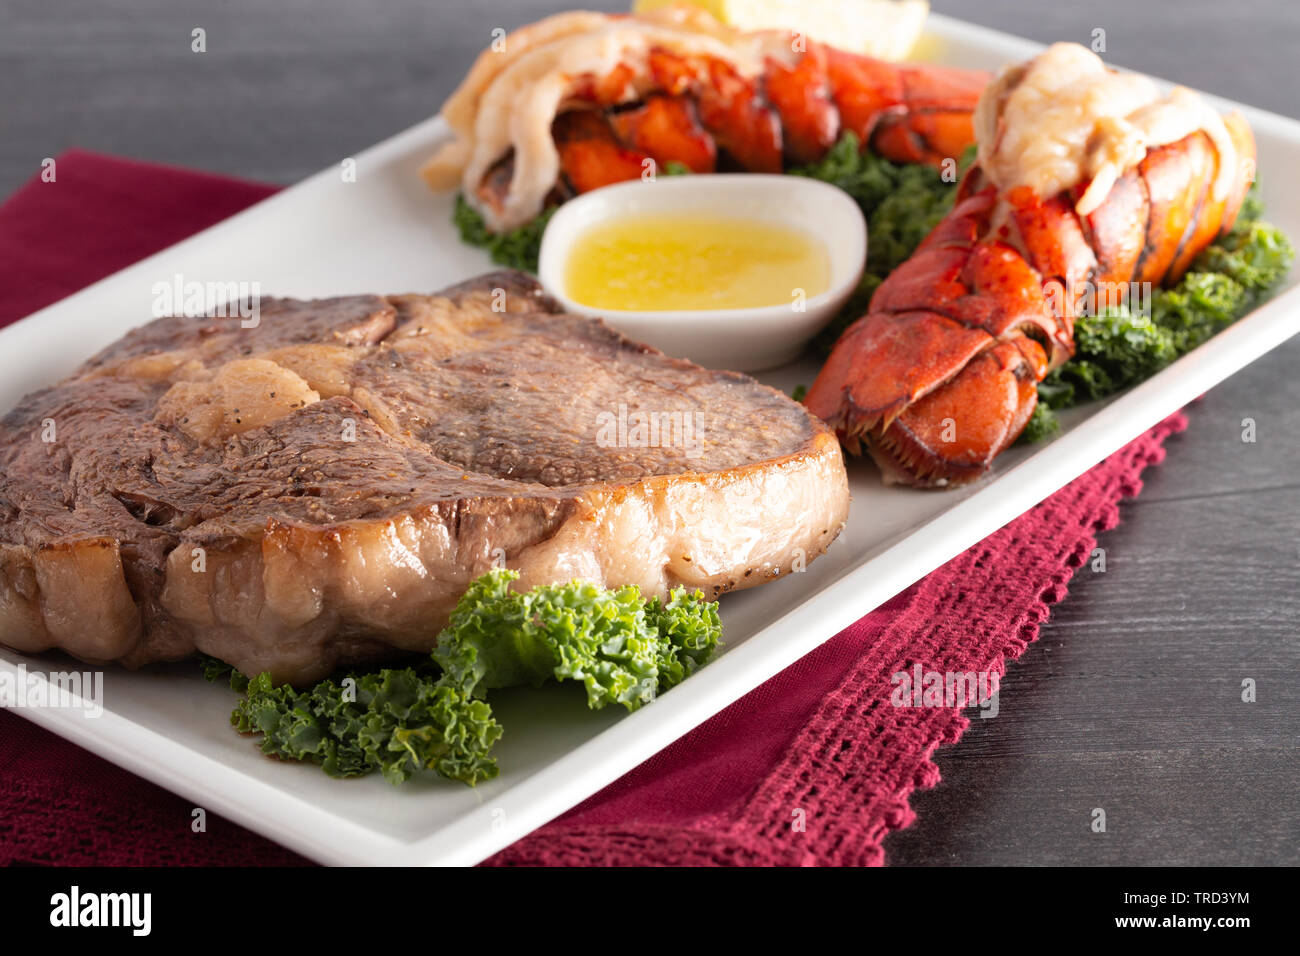 Steak Lobster Dinner High Resolution Stock Photography And Images Alamy